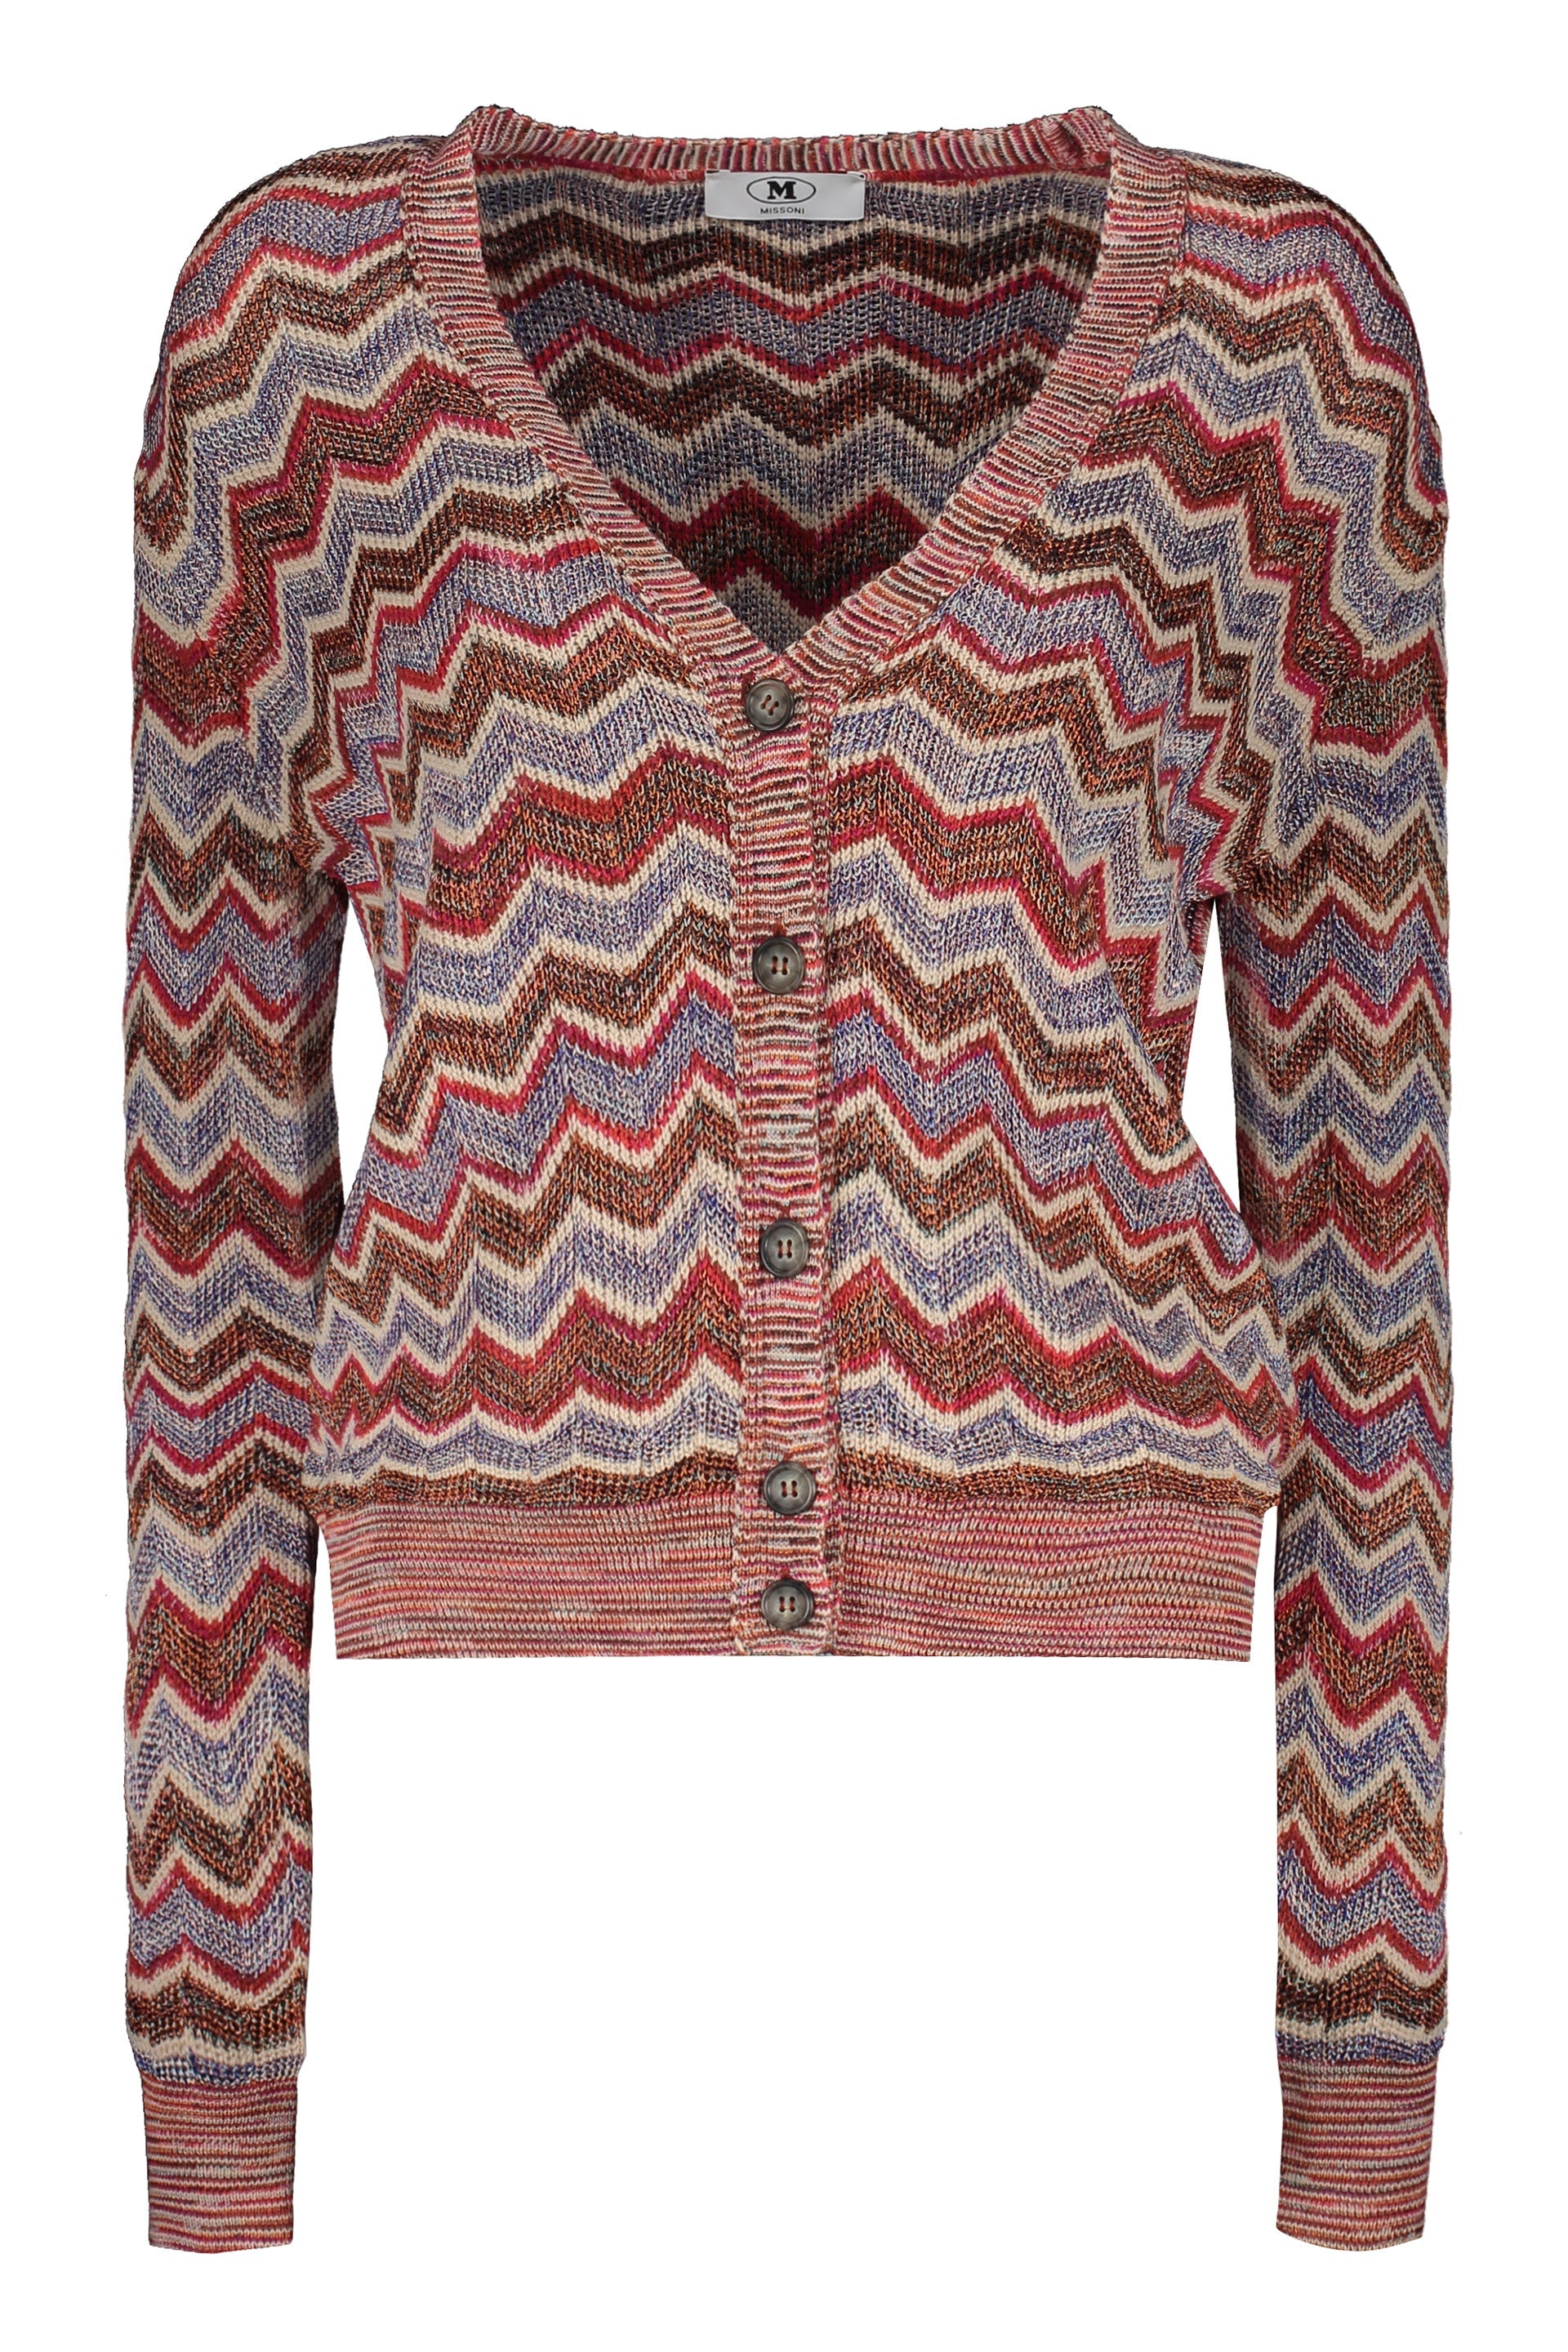 Missoni-OUTLET-SALE-Knit-cardigan-Strick-L-ARCHIVE-COLLECTION_c201f9a9-2319-4b24-aebf-d8a2e32ff588.jpg